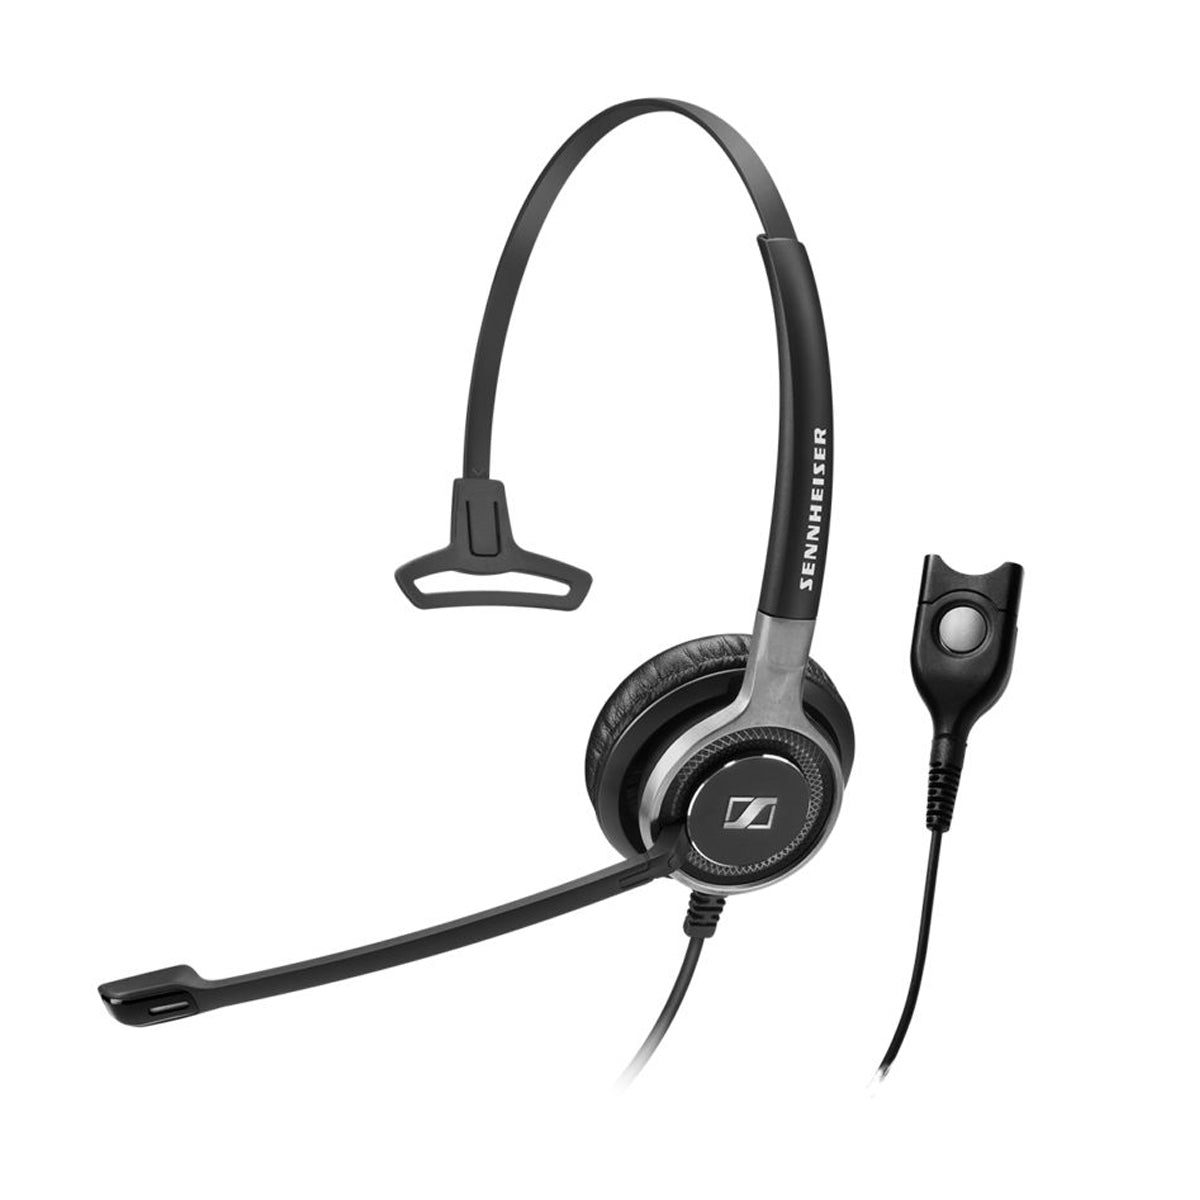 Sennheiser SC 630 Monaural Headset, Black-Silver, 1m Cable, Ultra Noise Cancelling Mic